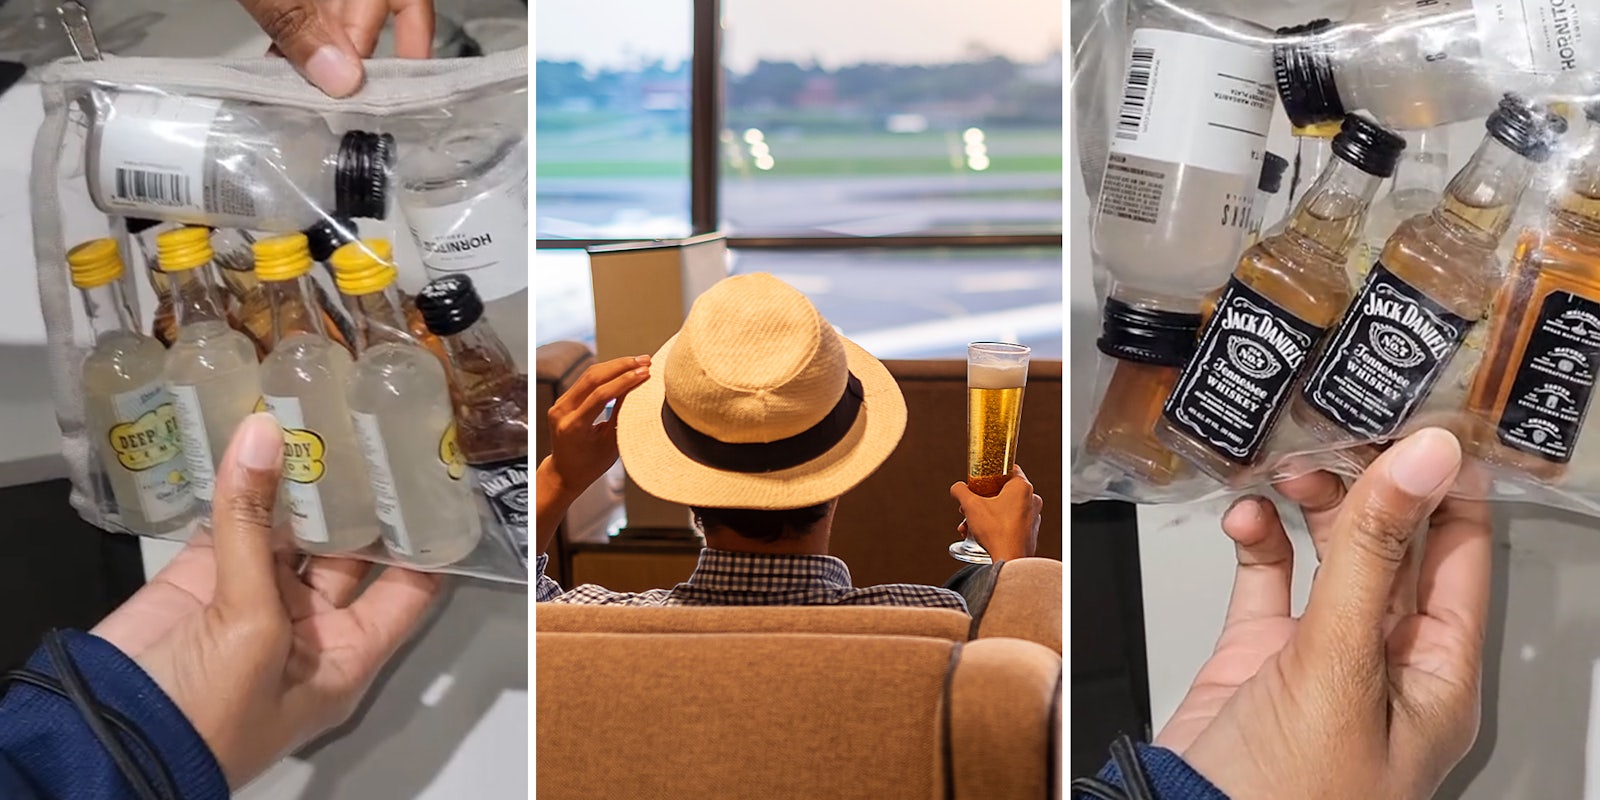 Traveler shares way they sneak alcohol into airport